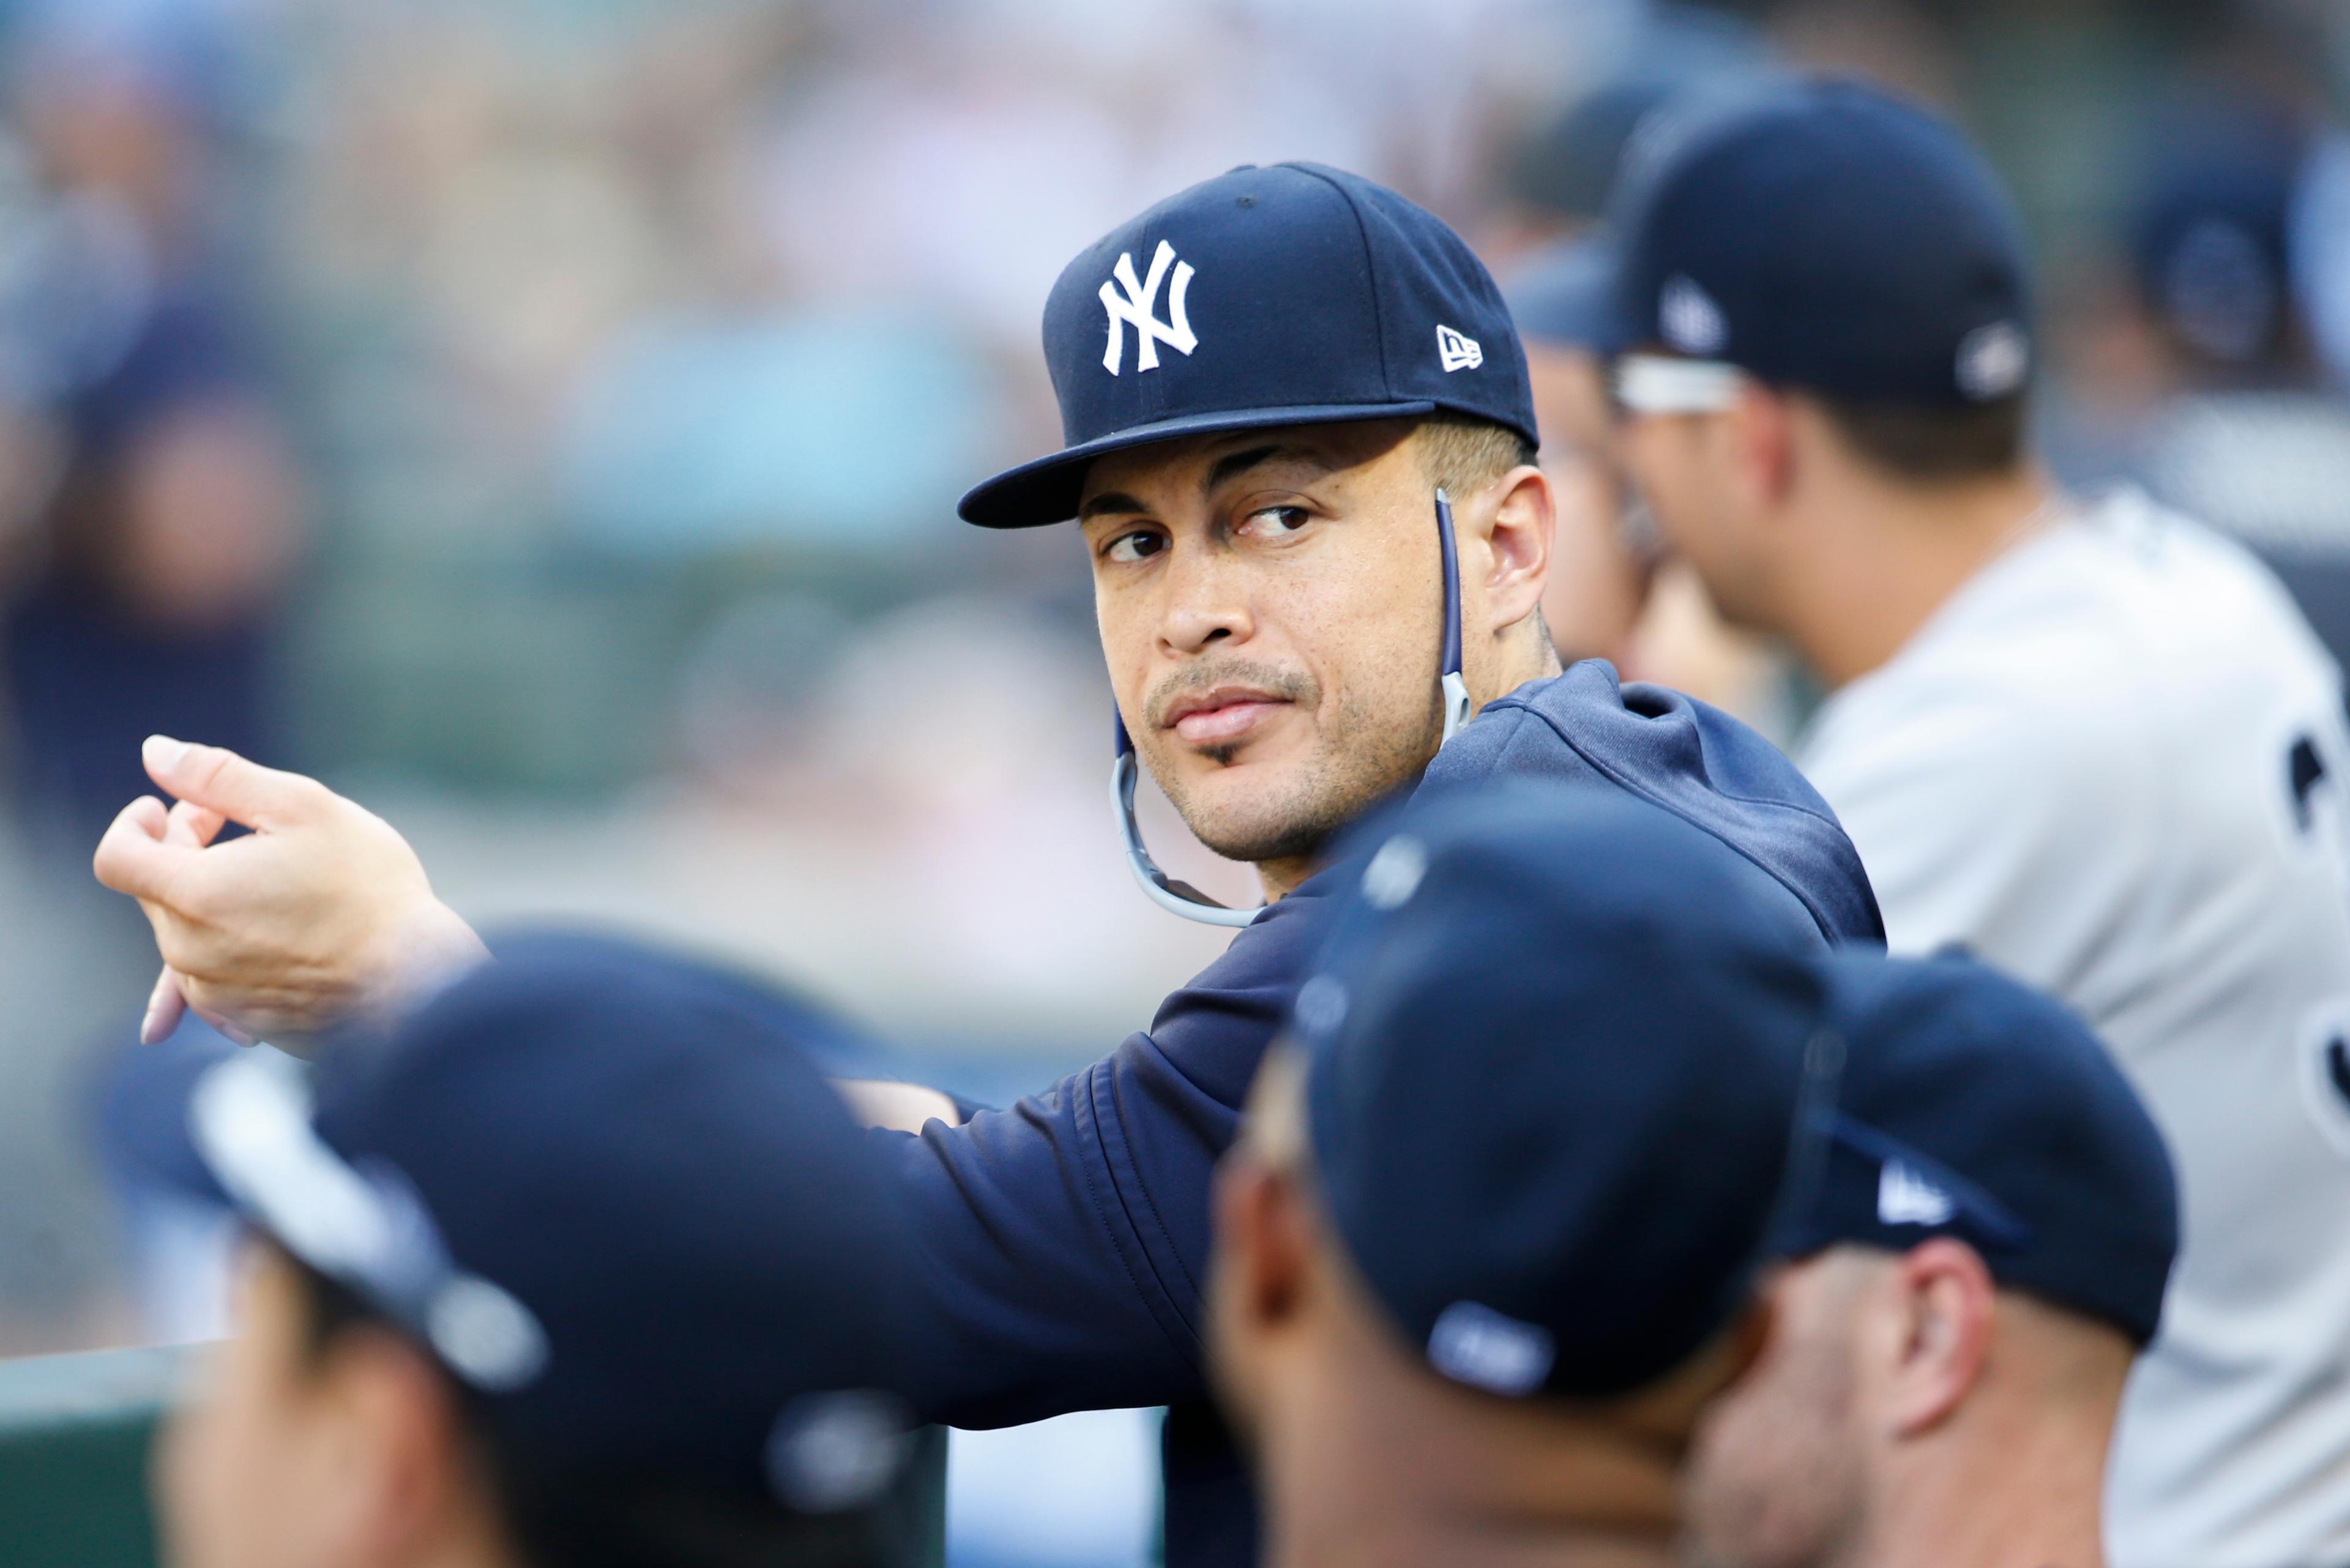 Aug 28, 2019; Seattle, WA, USA; New York Yankees outfielder Giancarlo Stanton (27) sits in the dugout during the ninth inning against the Seattle Mariners at T-Mobile Park. Mandatory Credit: Joe Nicholson-USA TODAY Sports / Joe Nicholson-USA TODAY Sports